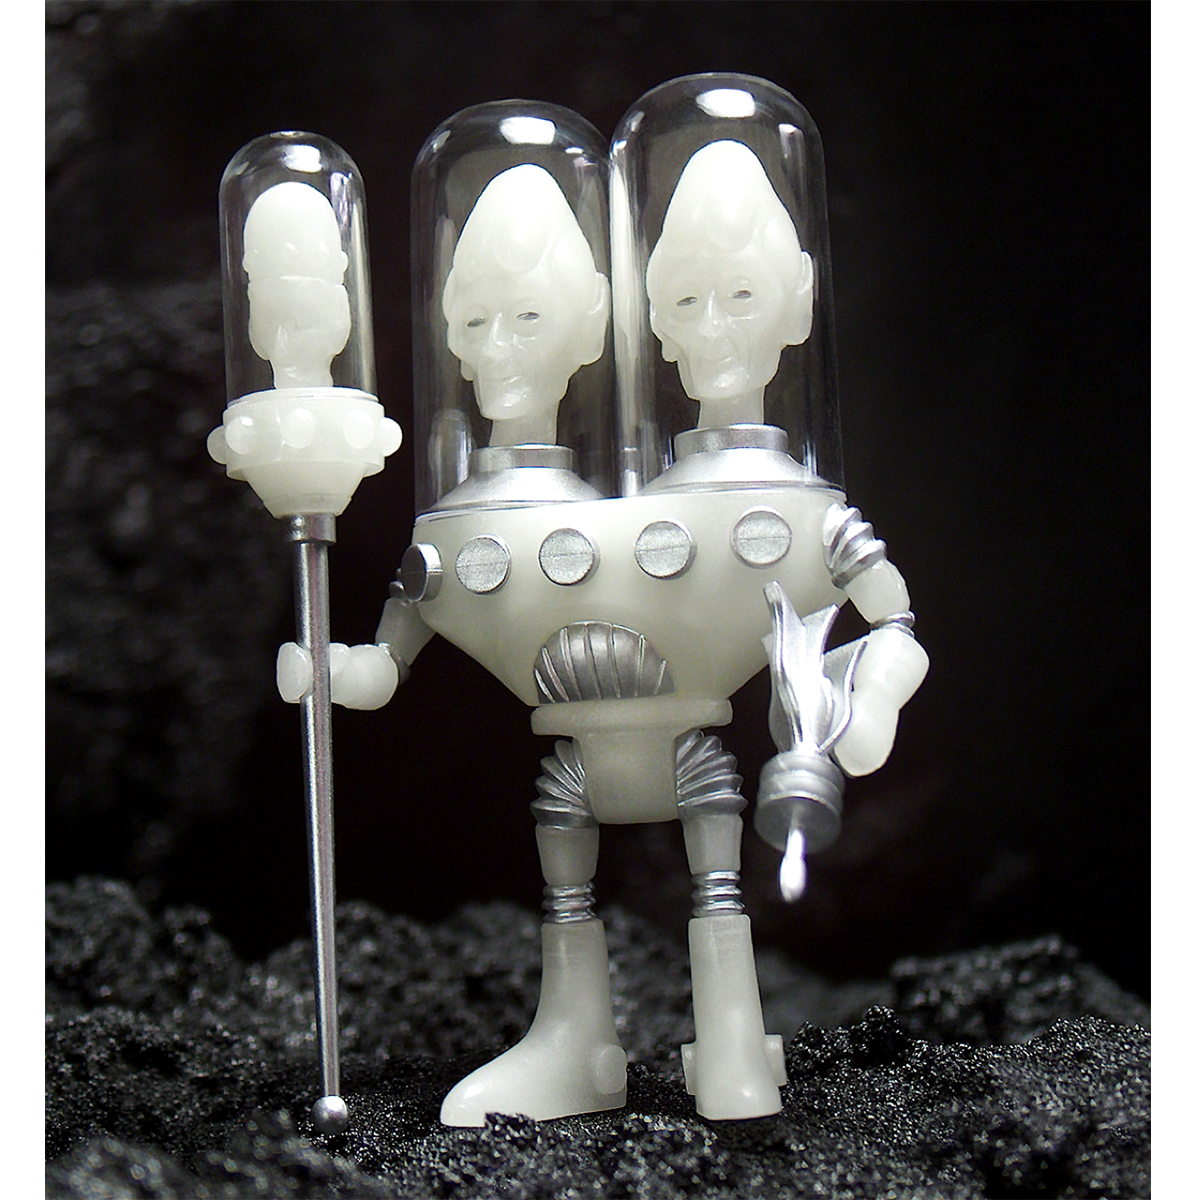 A Gemini Cosmic Radiation figure with a white head and two arms.